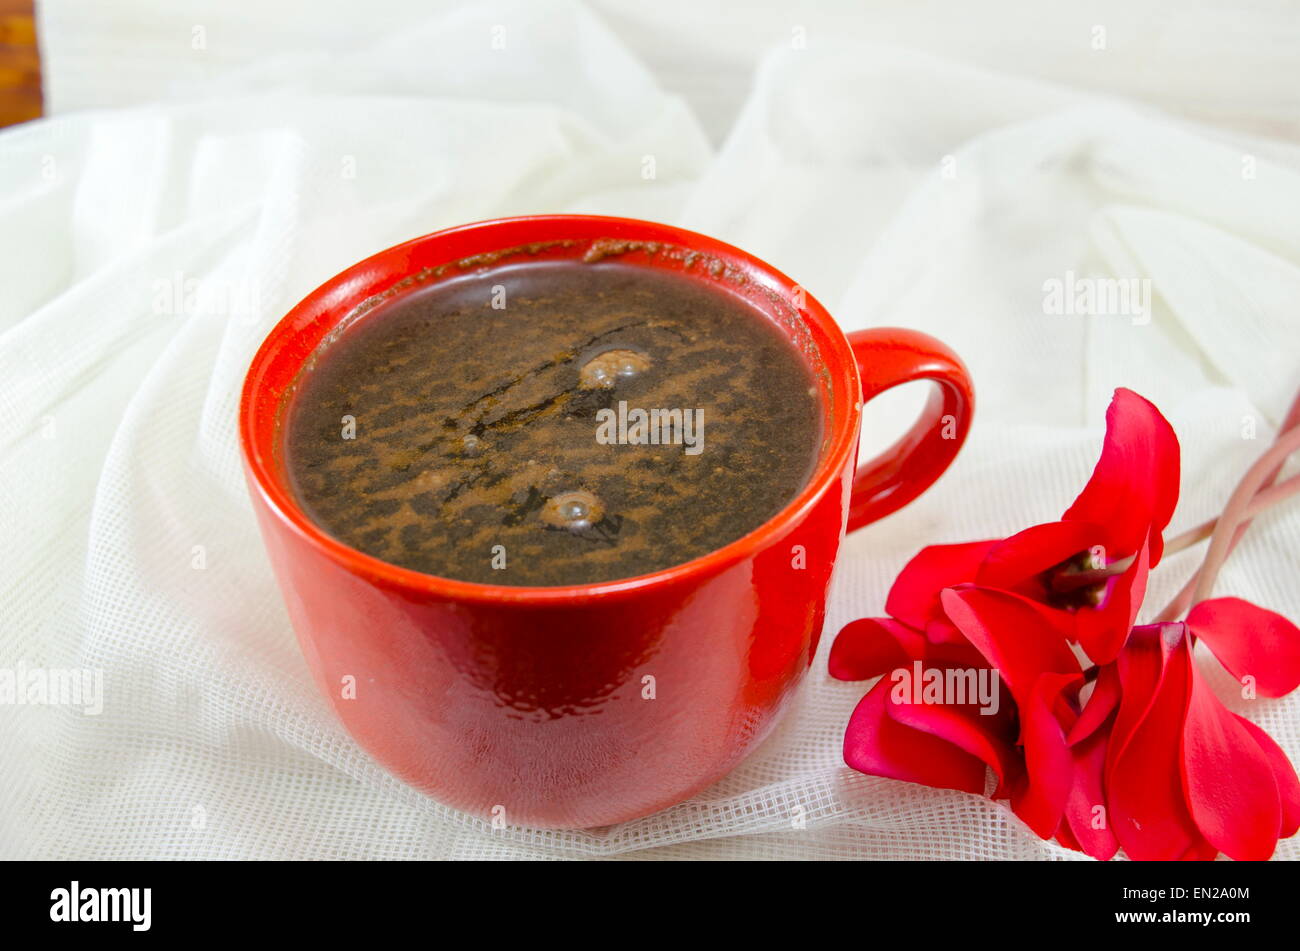 Red cup of coffee with decorated foam and a flower on a romantic vintage tablecloth Stock Photo